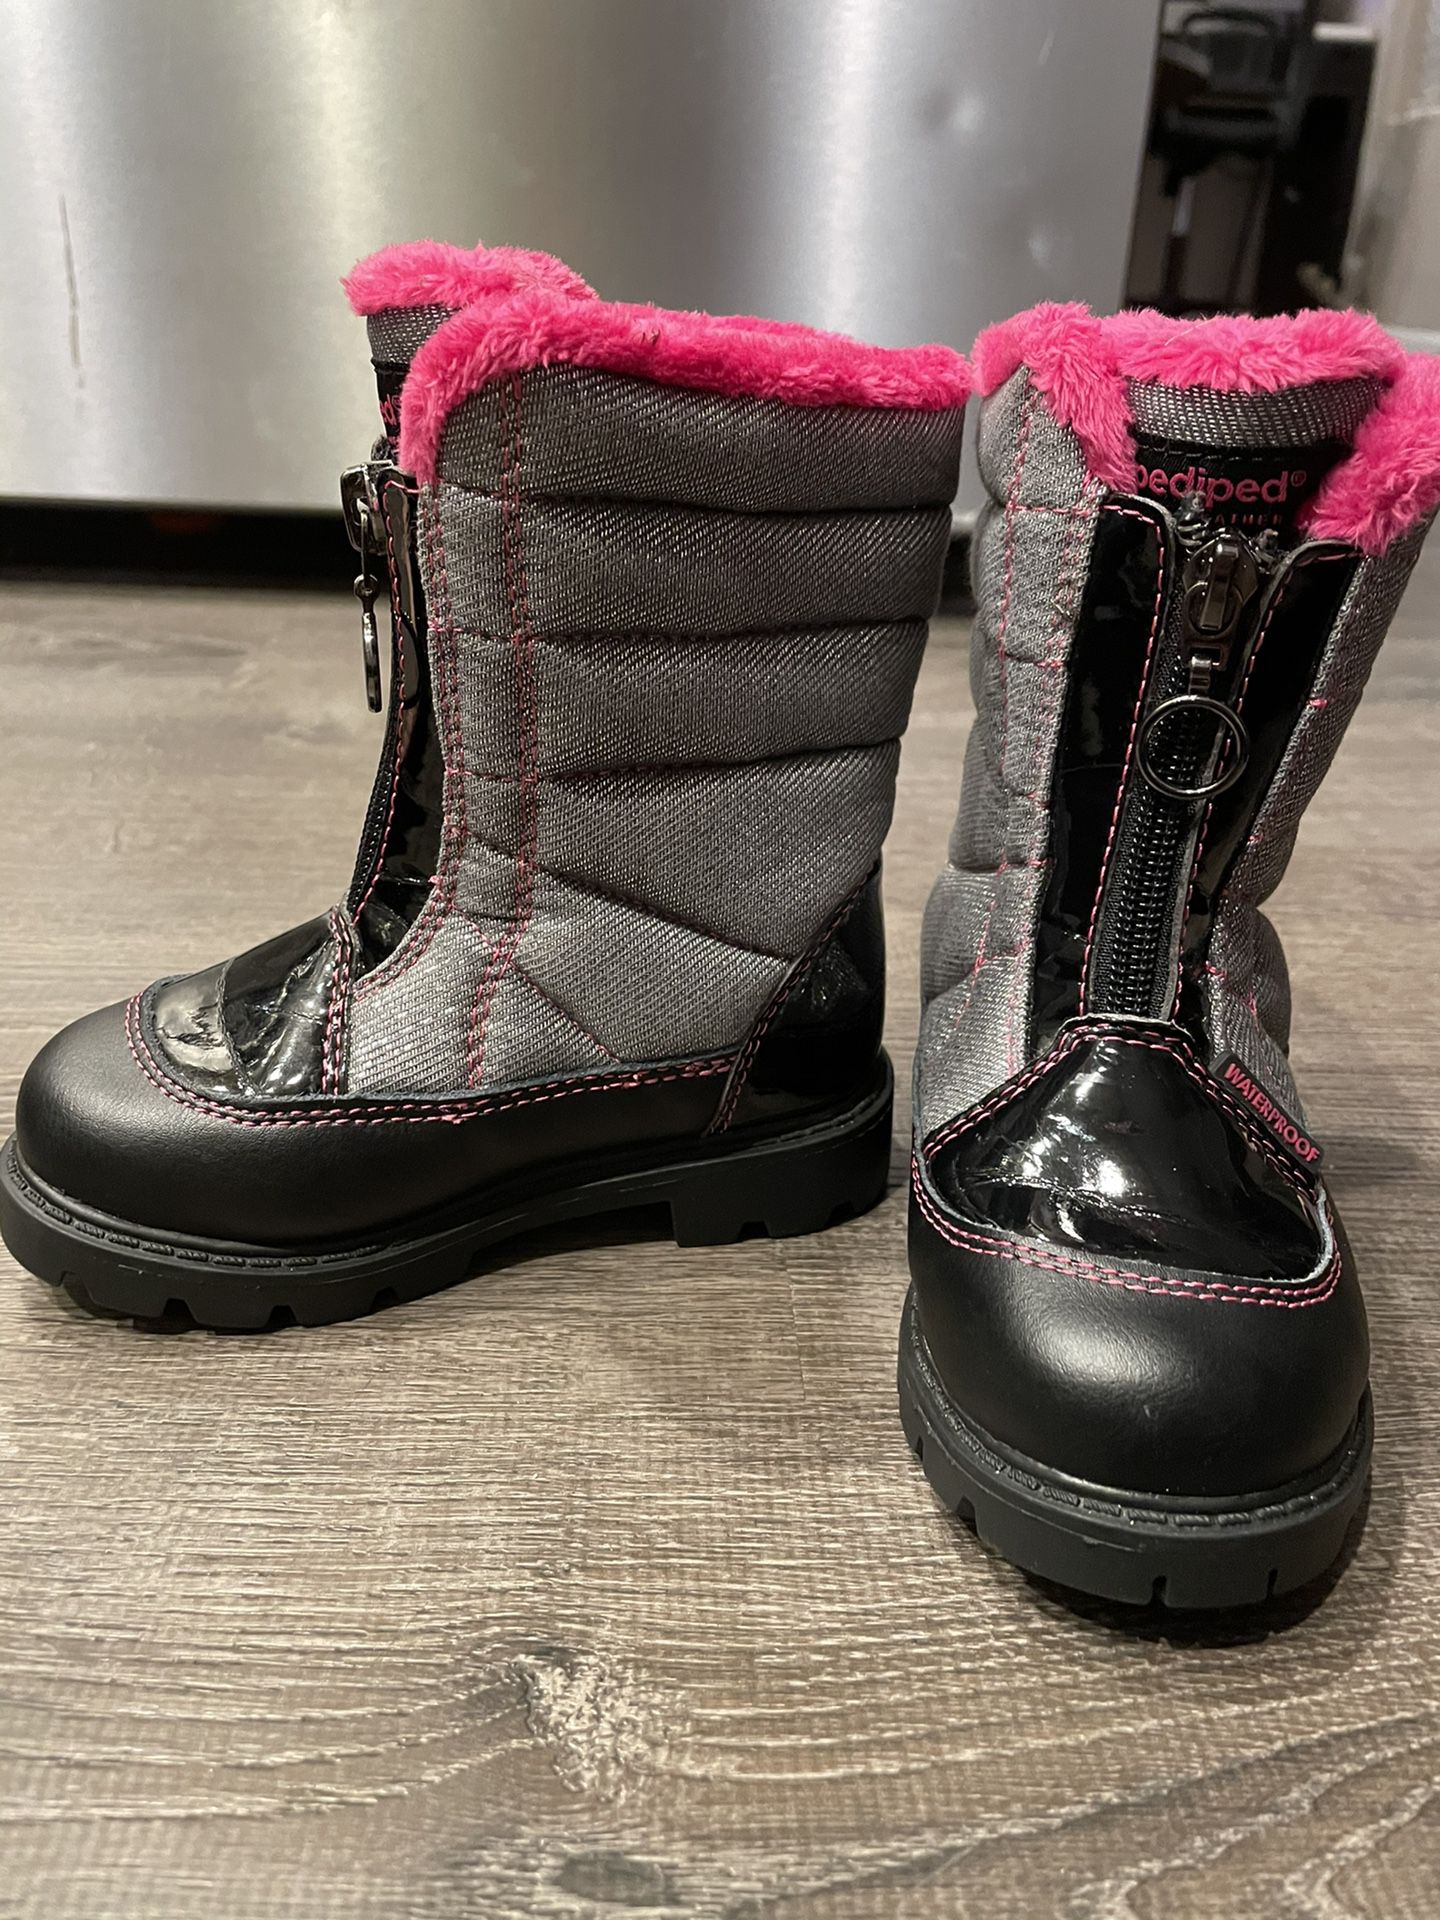 Snow Boots Toddler Size 7.5-8 